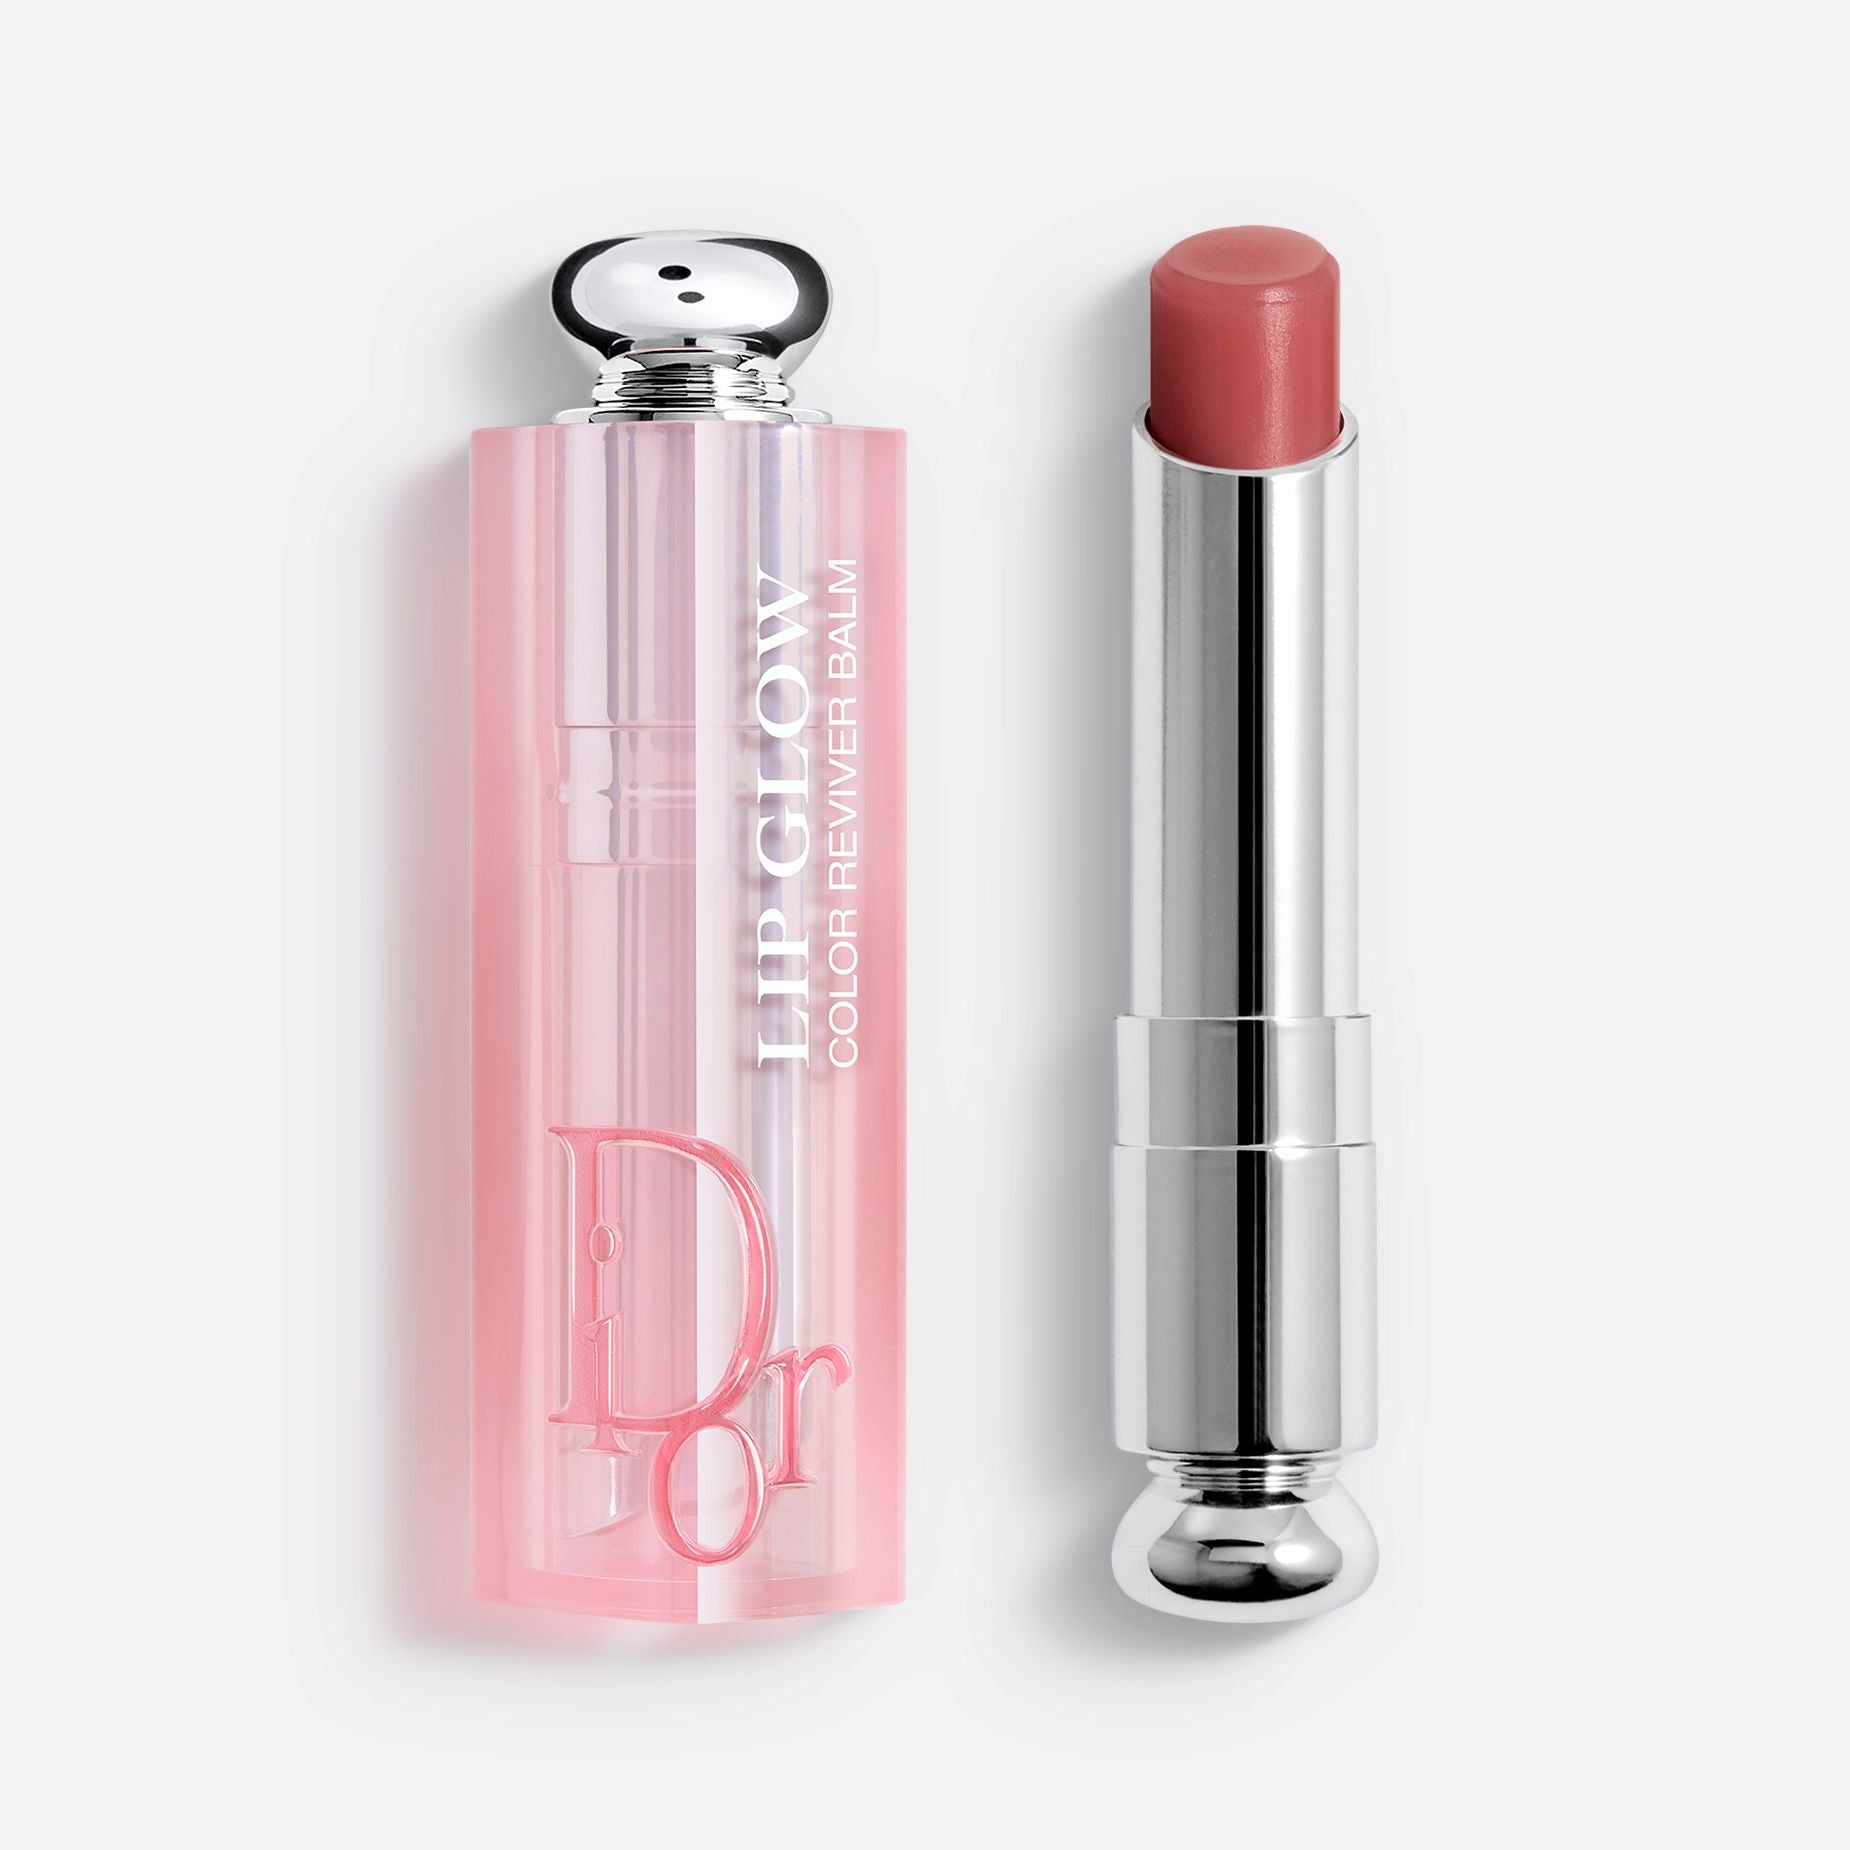 Dior Beauty celebrates BLACKPINK Jisoos birthday with a new strawberry  jam shade of their bestselling lippie  Daily Vanity Singapore